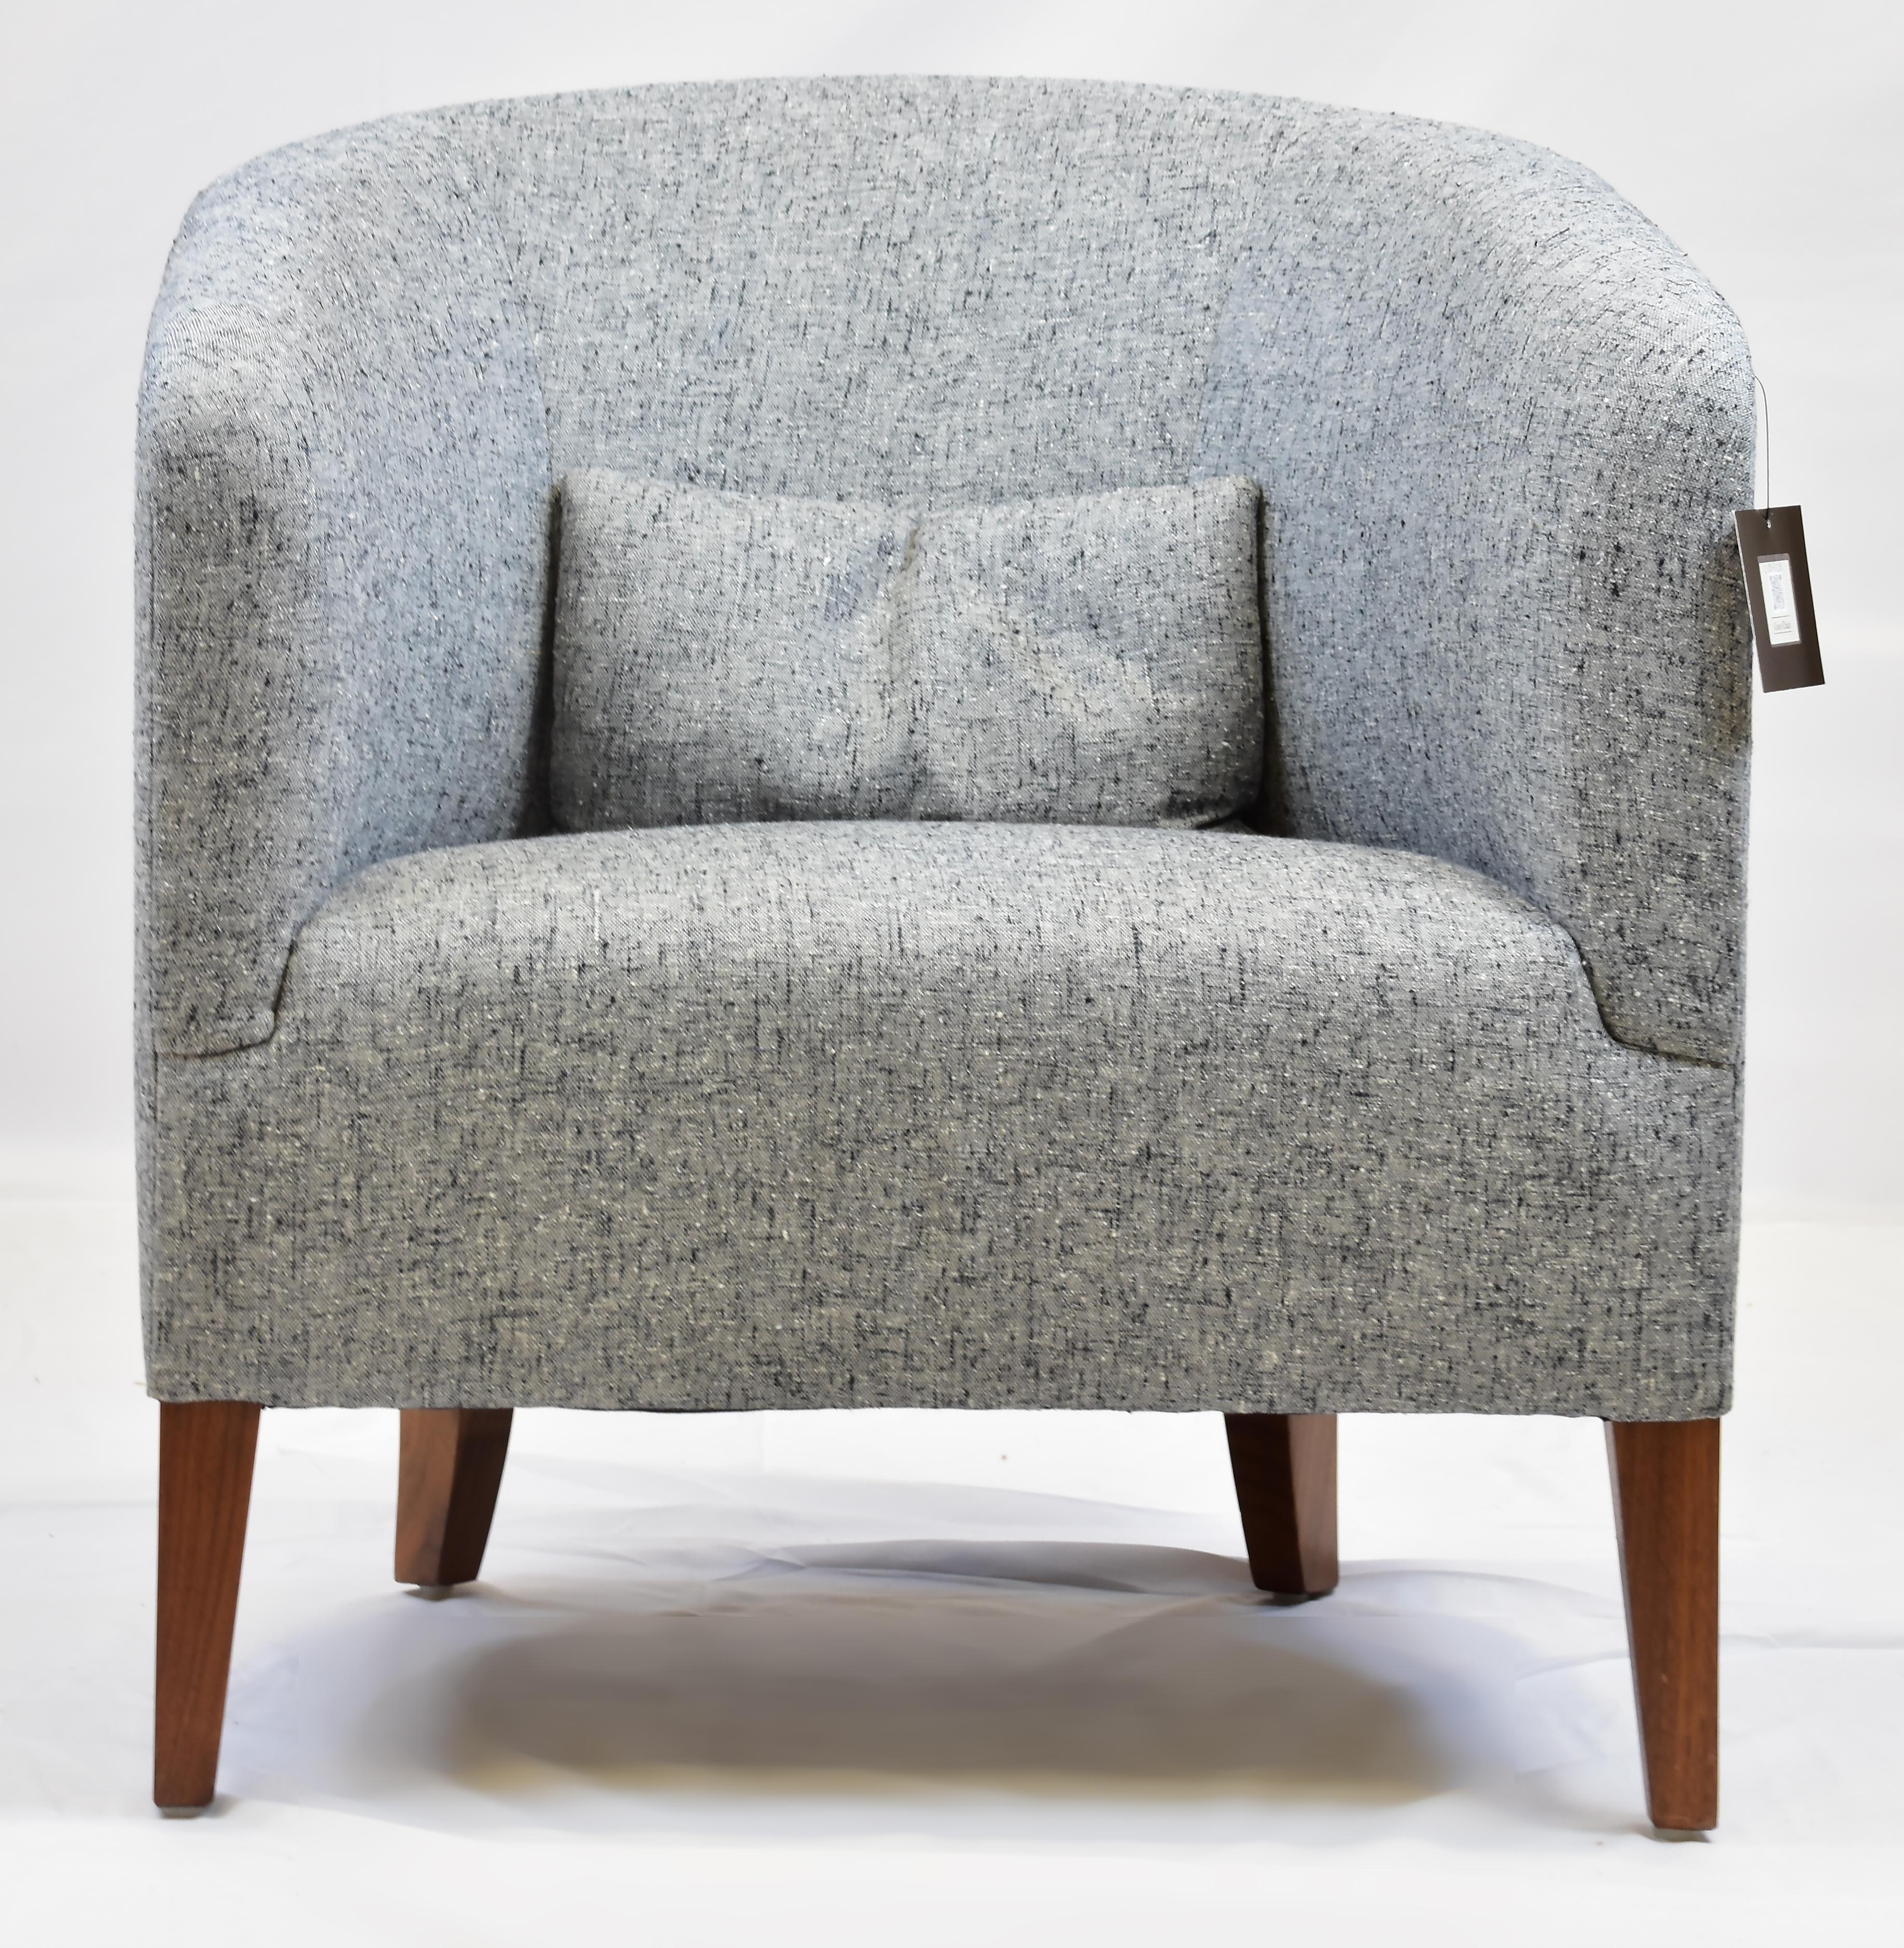 Le Jeune Upholstery Gino Barrel Back Club Chair Showroom Model

Offered for sale is a Le Jeune Upholstery GINO showroom model club chair. The chair is medium-scaled barrel chair with a tight seat and back sitting style. The legs are built using